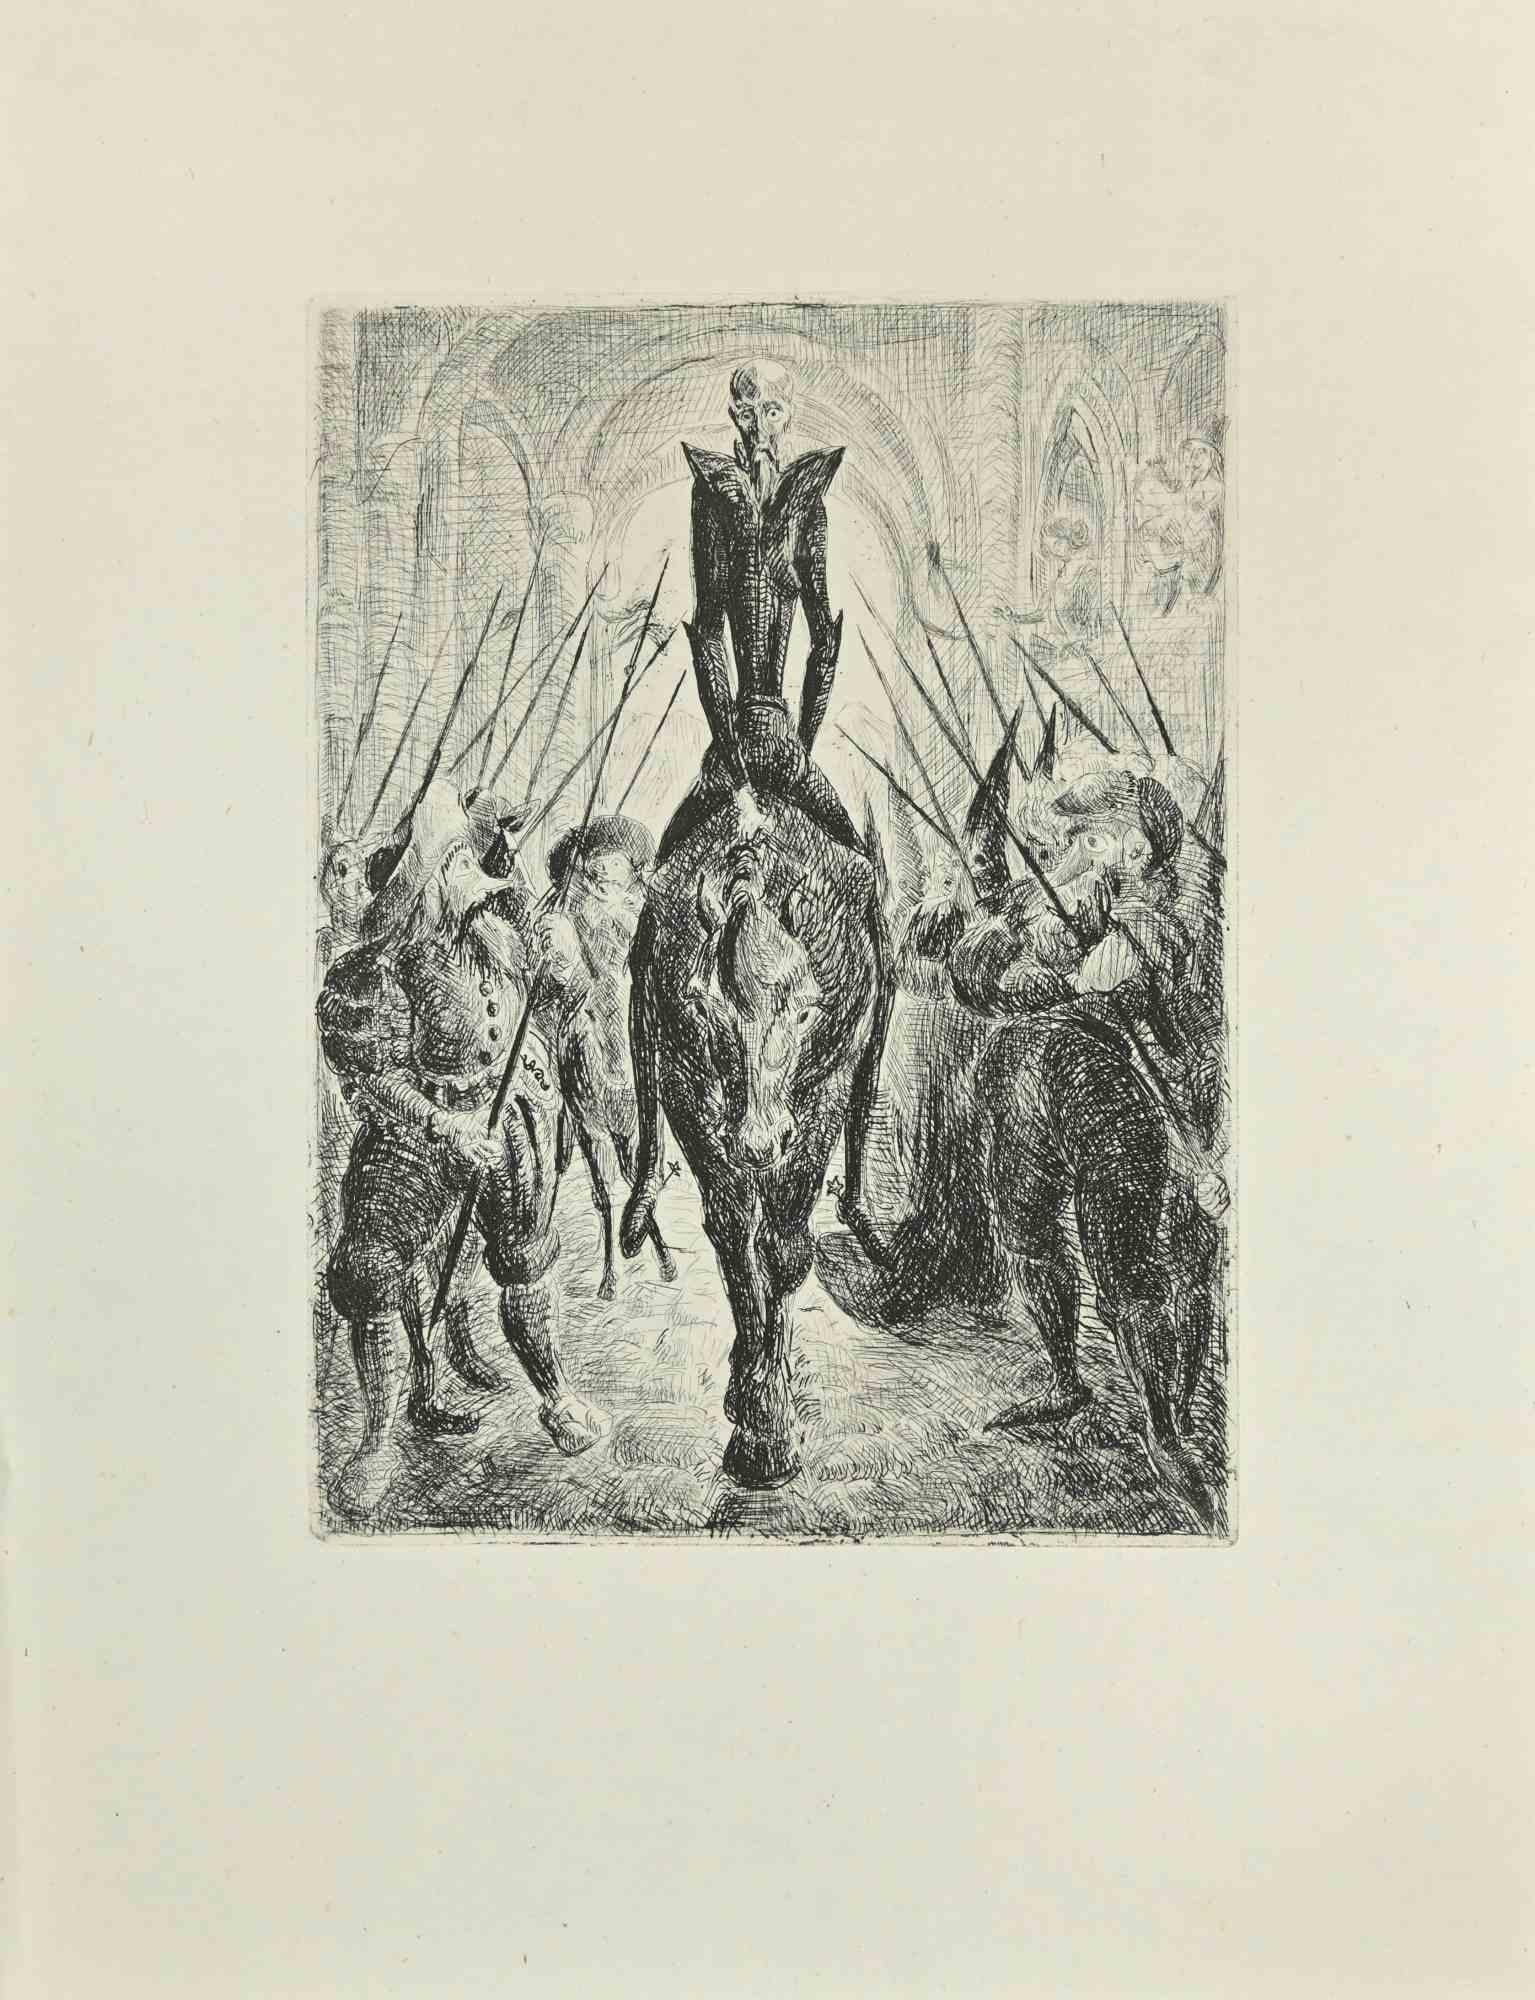 Don Quixote is an etching and drypoint print on ivory-colored Chinese paper, realized by Wladyslaw Jahl in 1951.

It belongs to a limited edition of 125 specimens.

Good conditions.

The artwork represents a visual scene from Don Quixote Book that